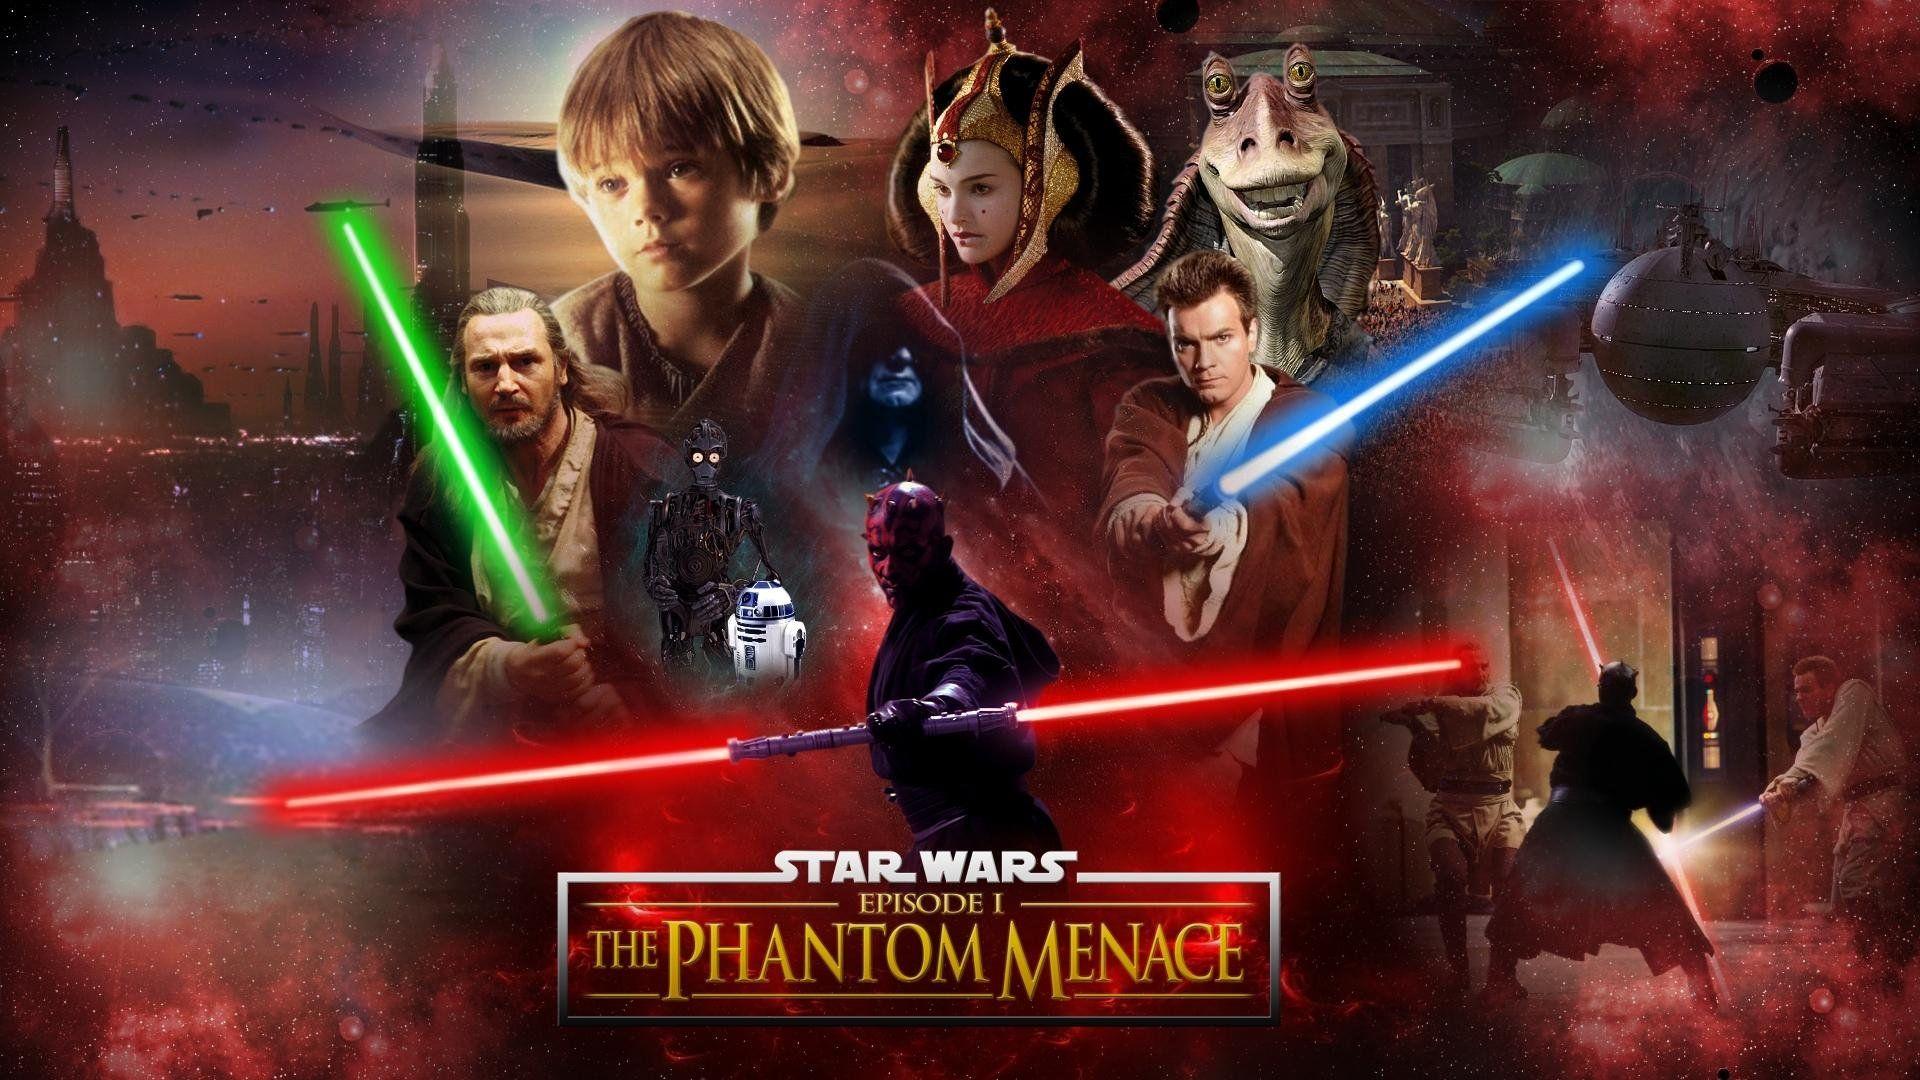 Star Wars Ep. I: The Phantom Menace download the new